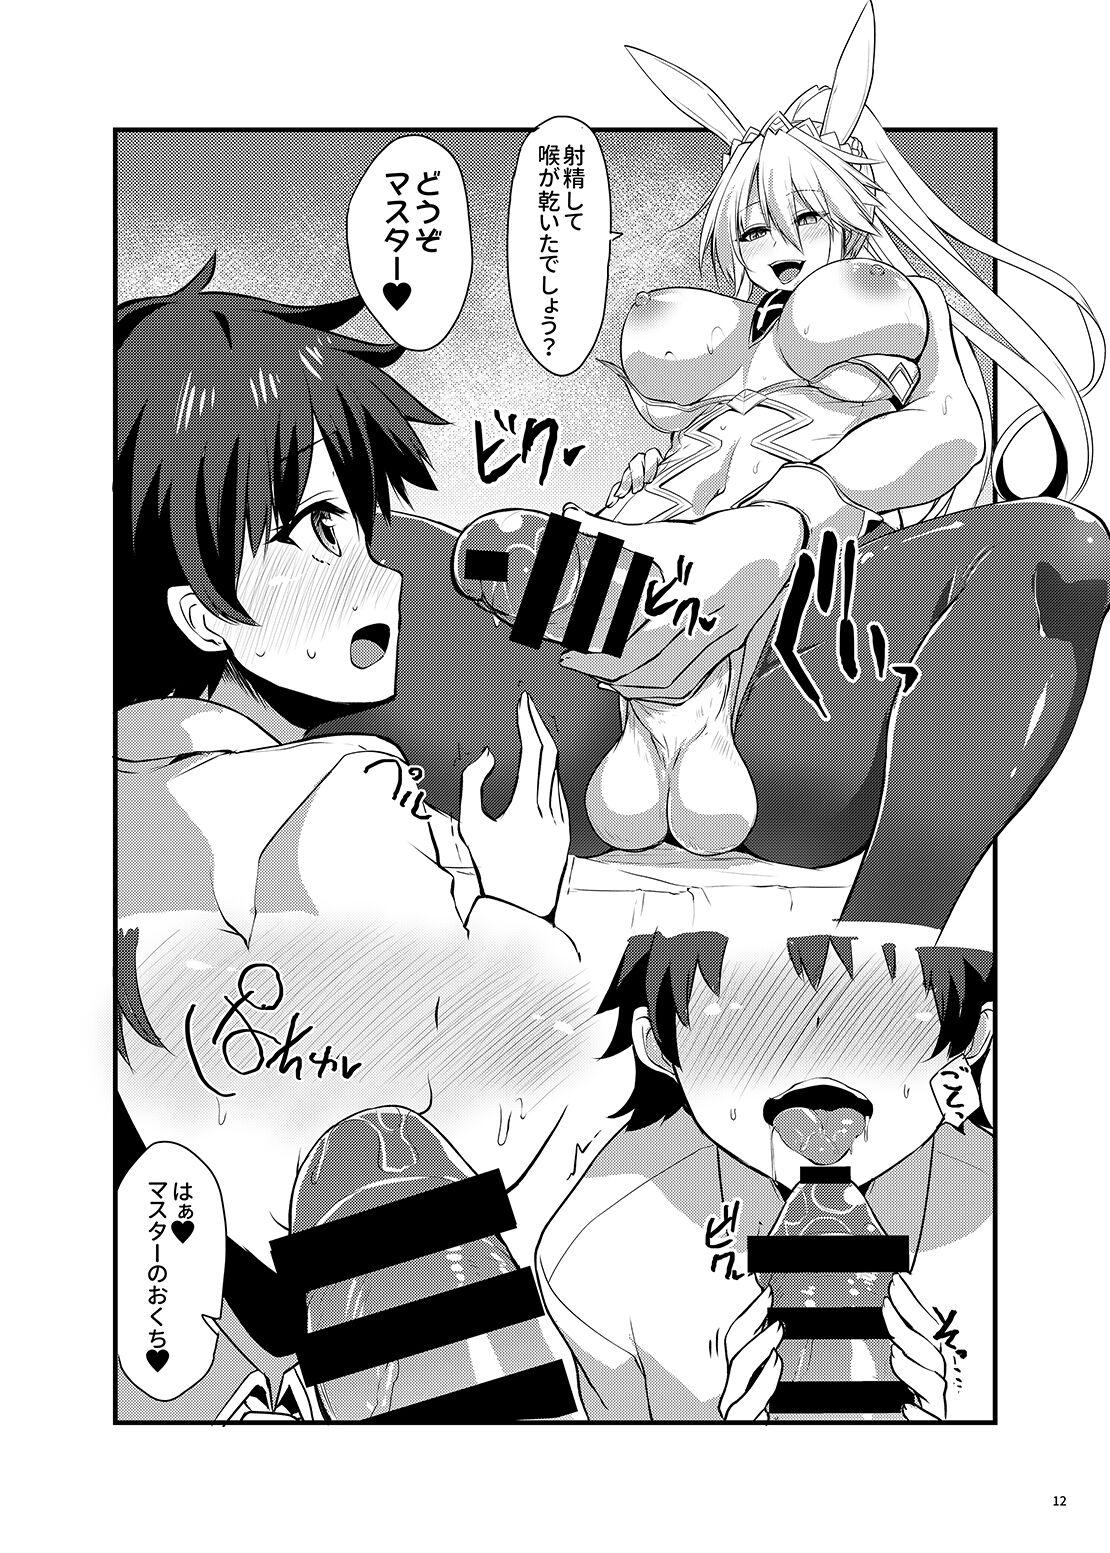 Blond ふたなりバニ上と - Fate grand order Anal Creampie - Page 11